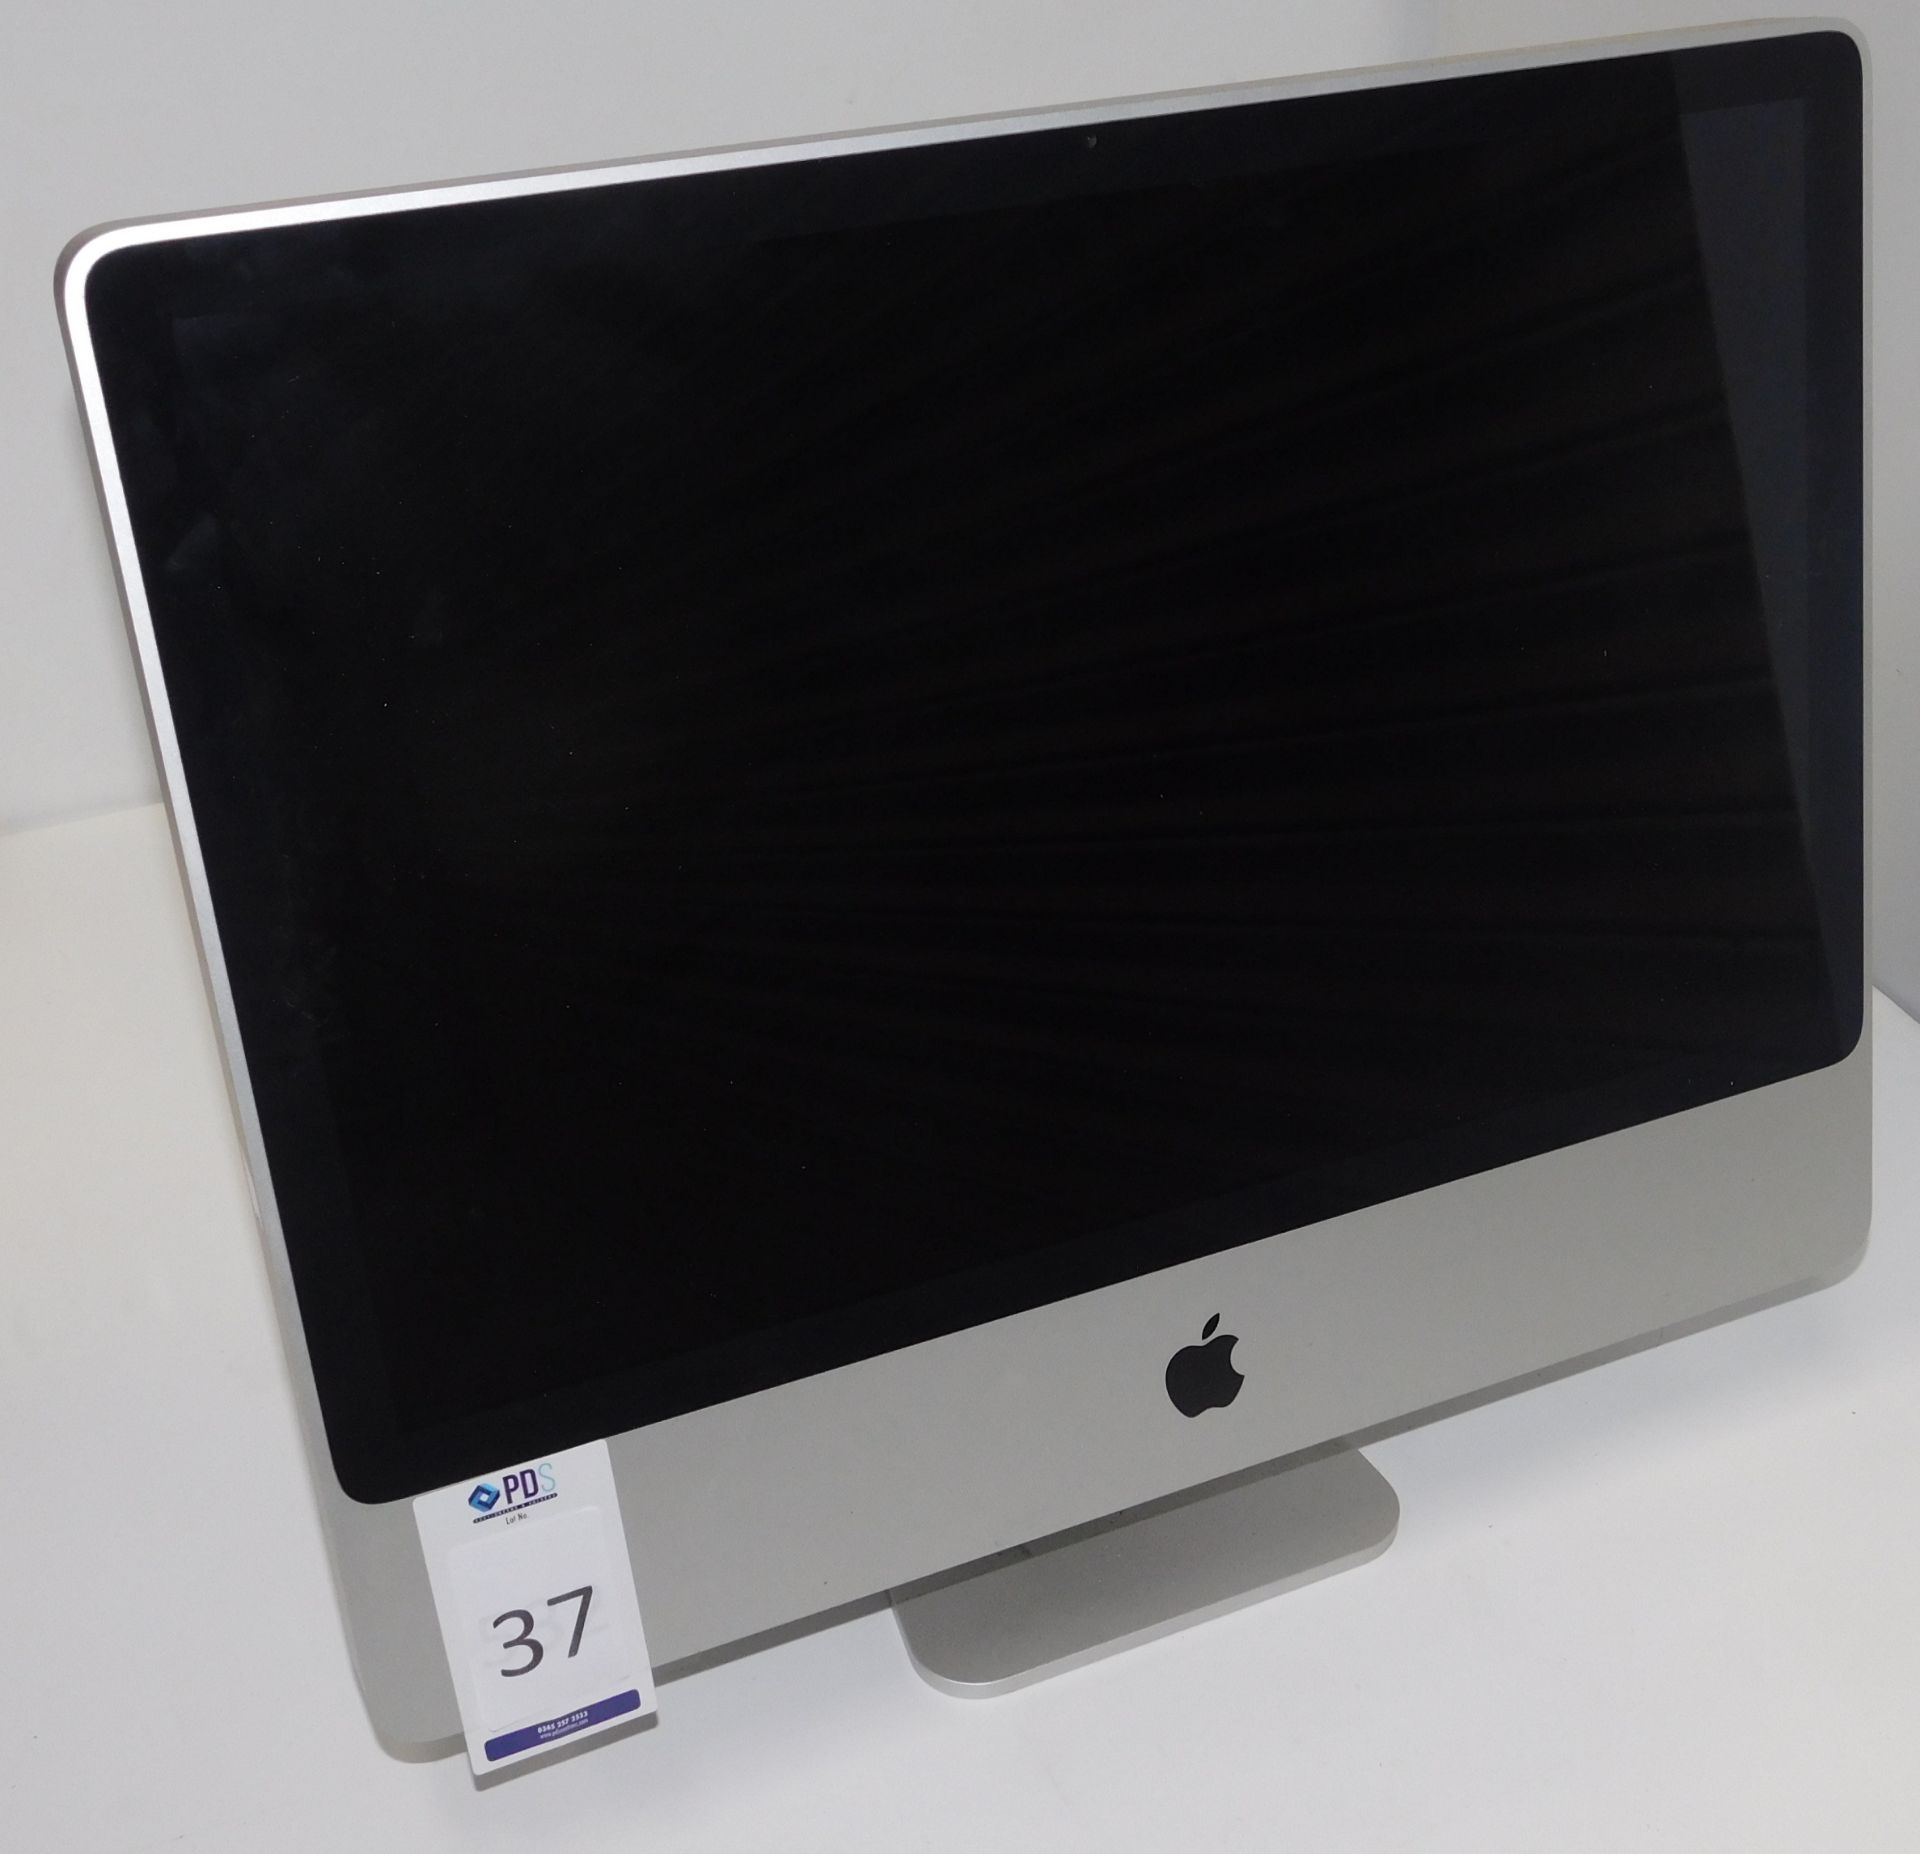 Apple iMac, 24 Inch Display, 2.8GHz, Core 2 Duo (2008), Serial Number: YM8370KBZE4 (Located